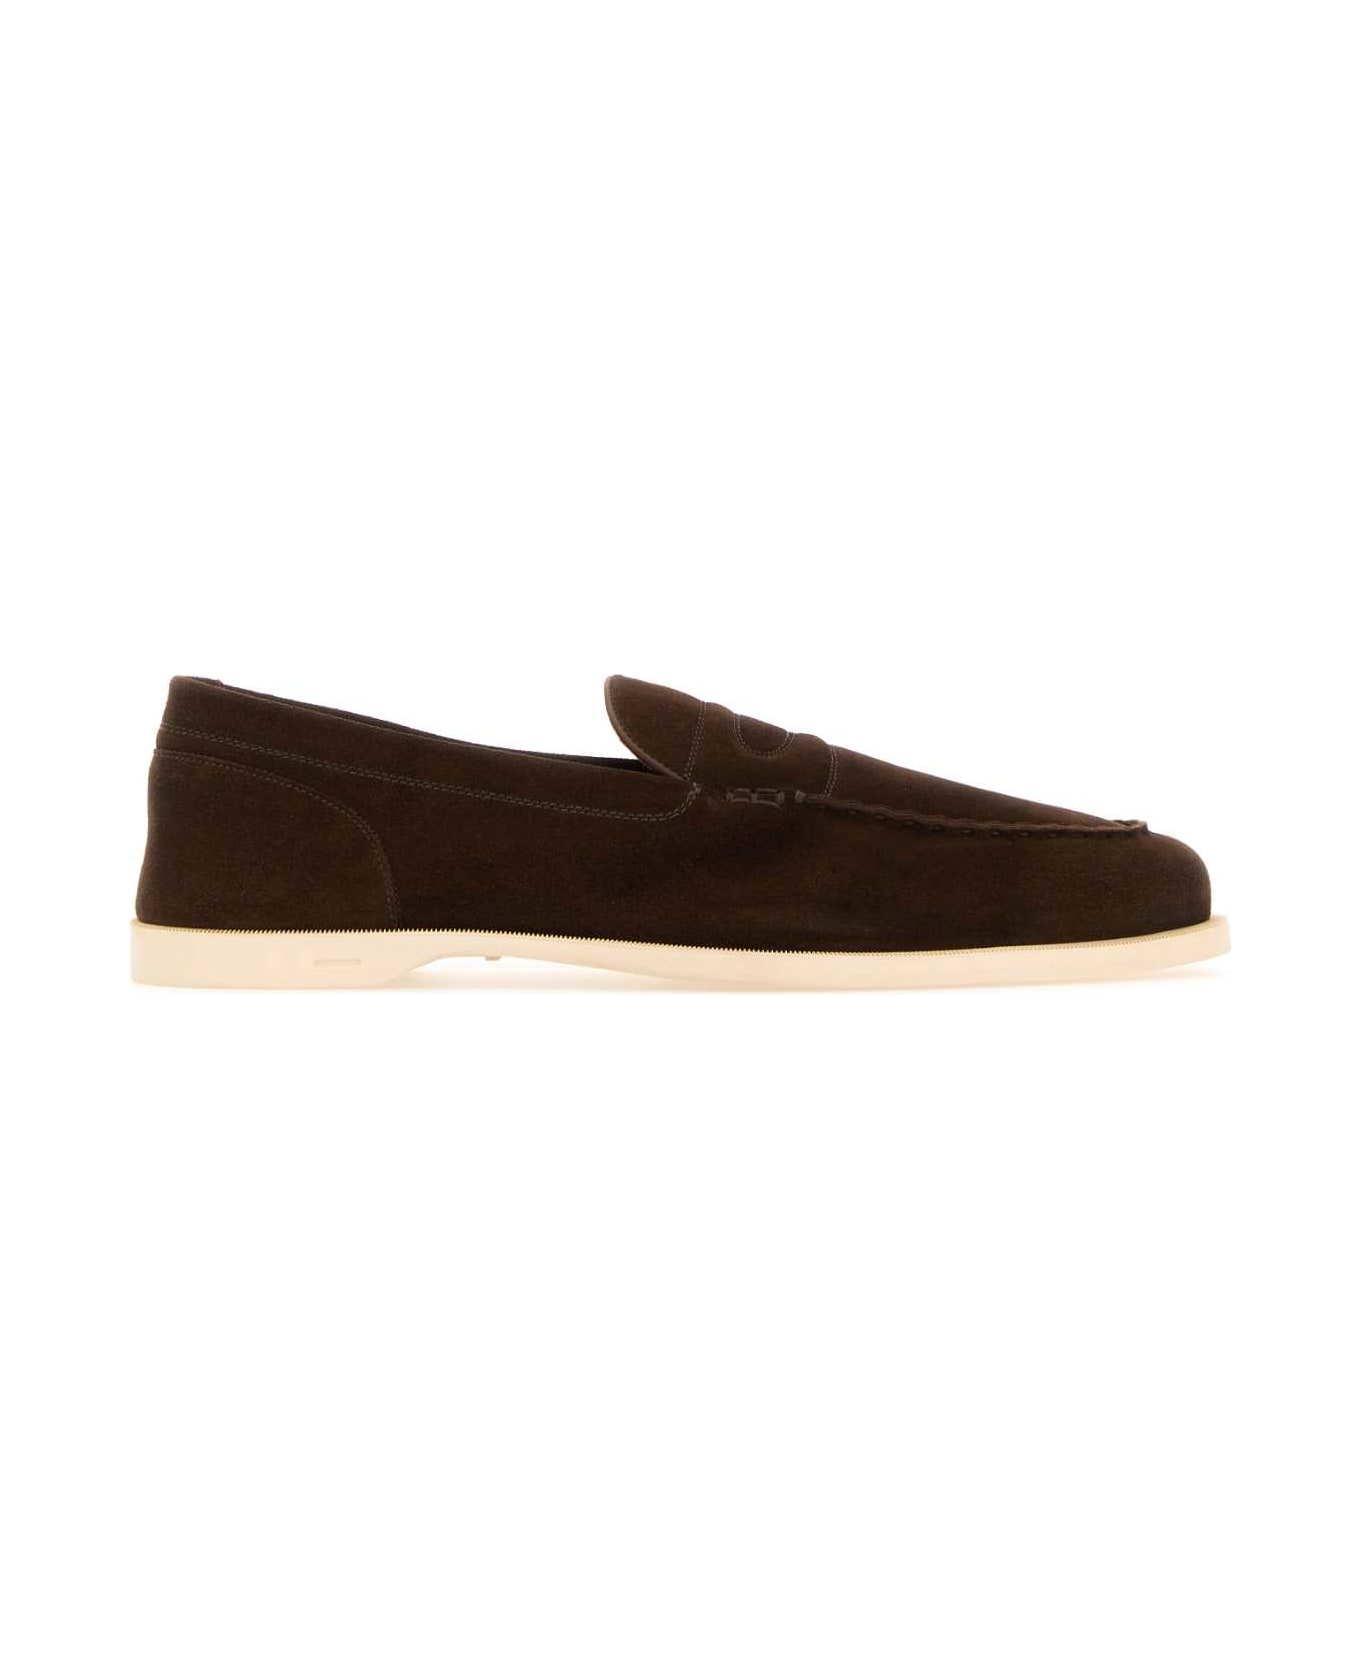 John Lobb Chocolate Suede Pace Loafers - 2Y